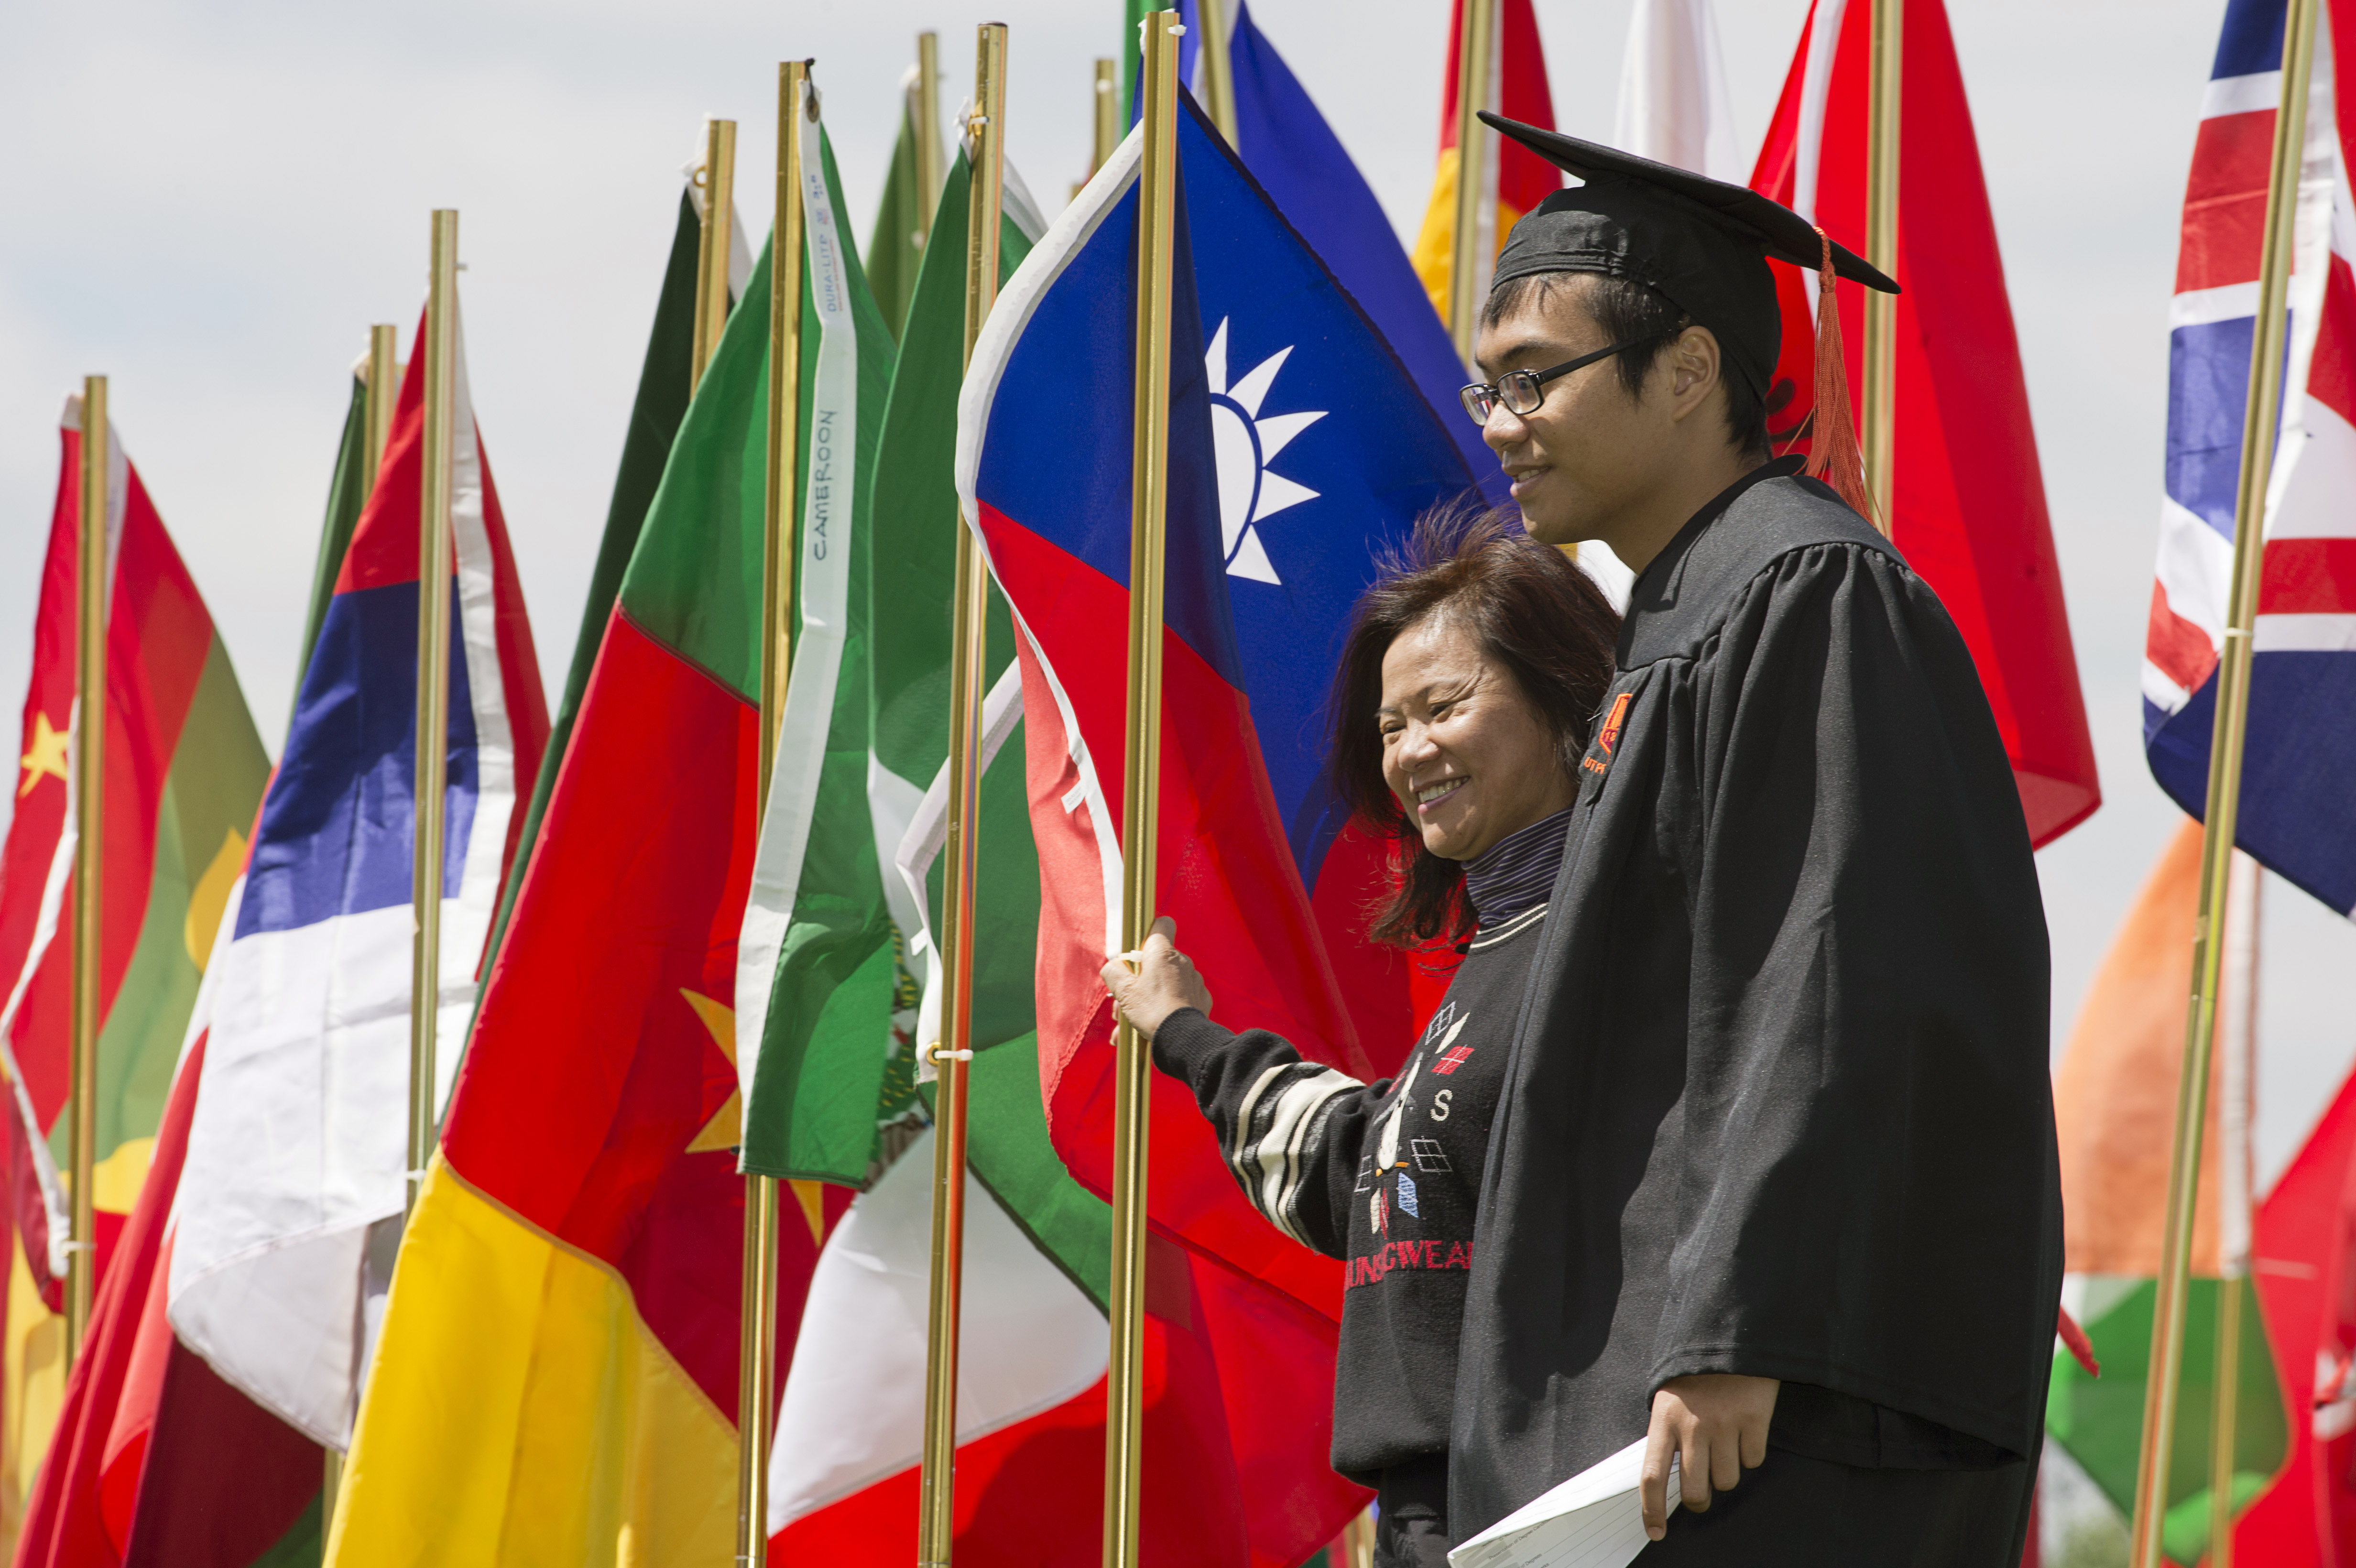 Families of international students posing with graduates and international flags